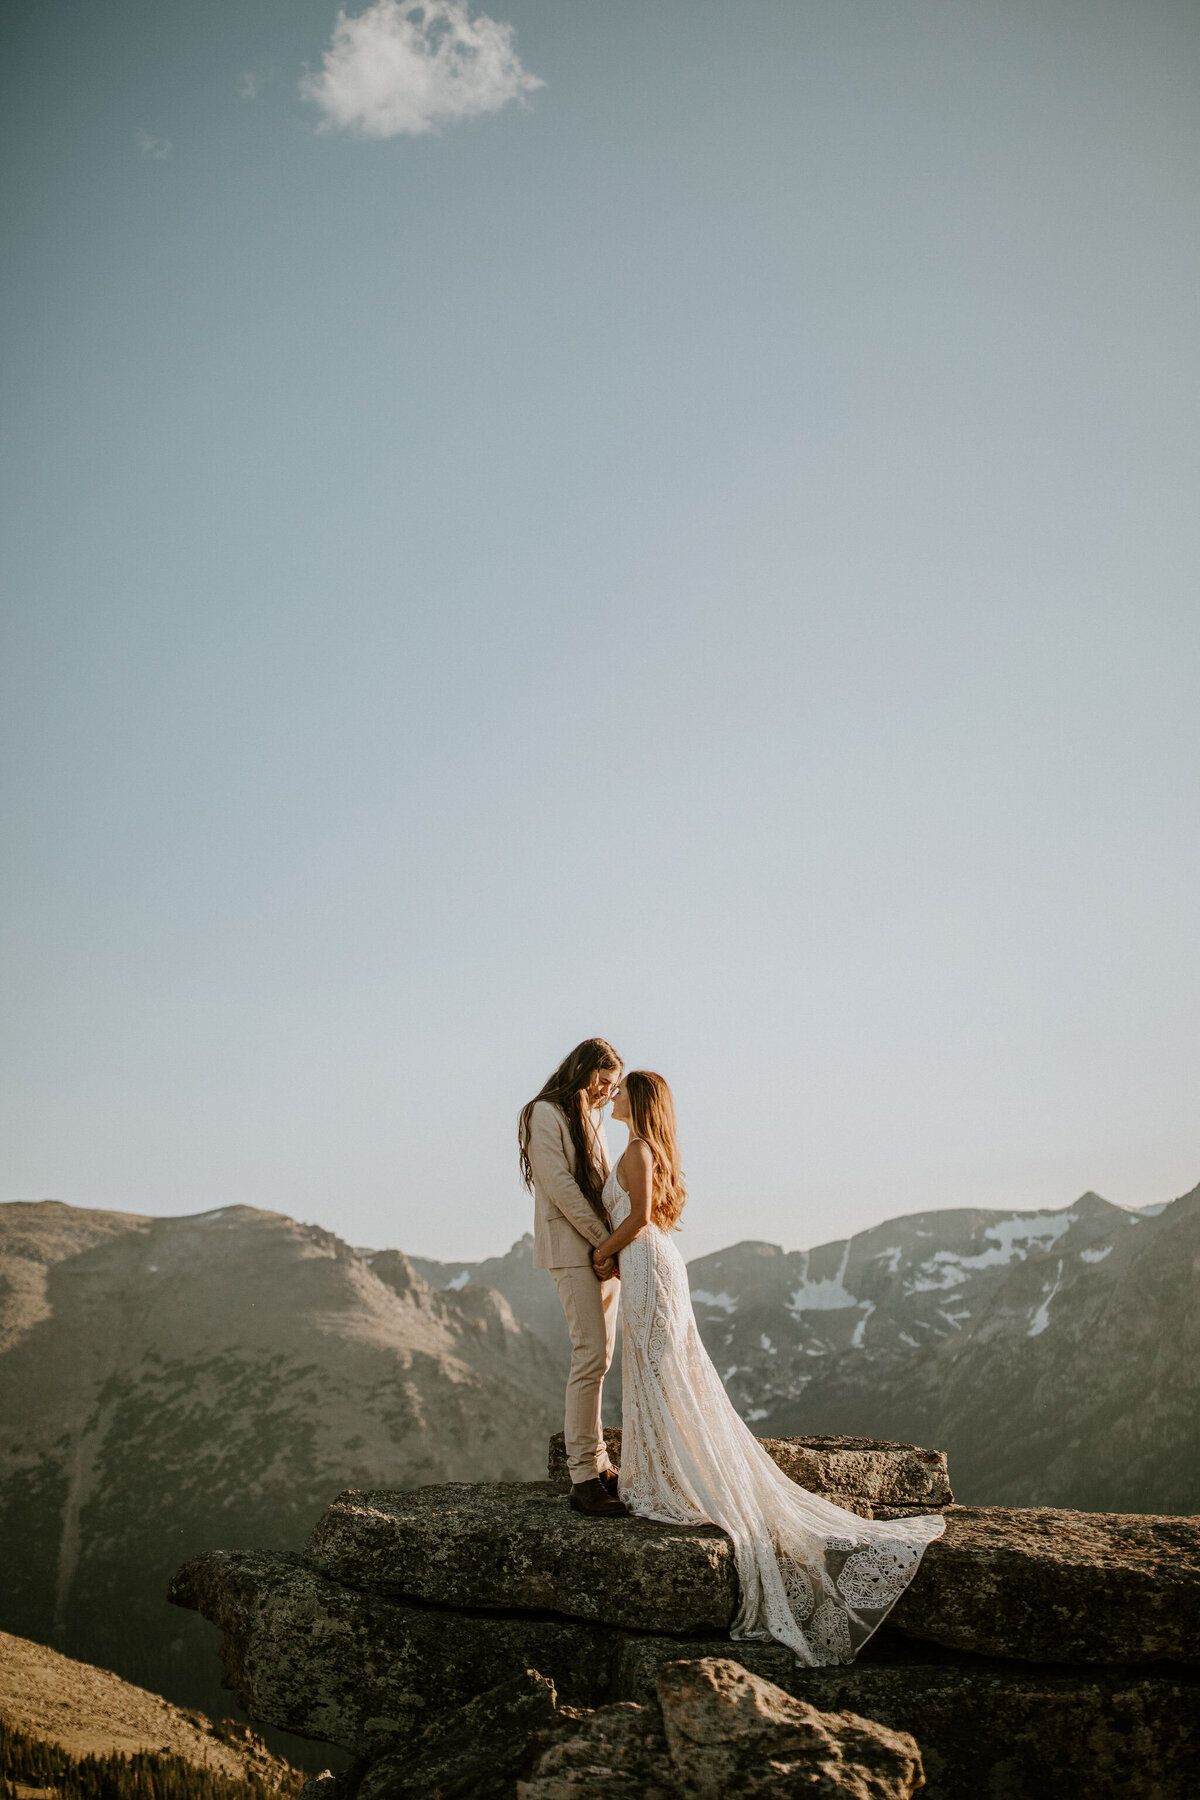 Bride and groom wearing an ivory suit and white wedding gown atop a mountain stone with the landscape in the back.